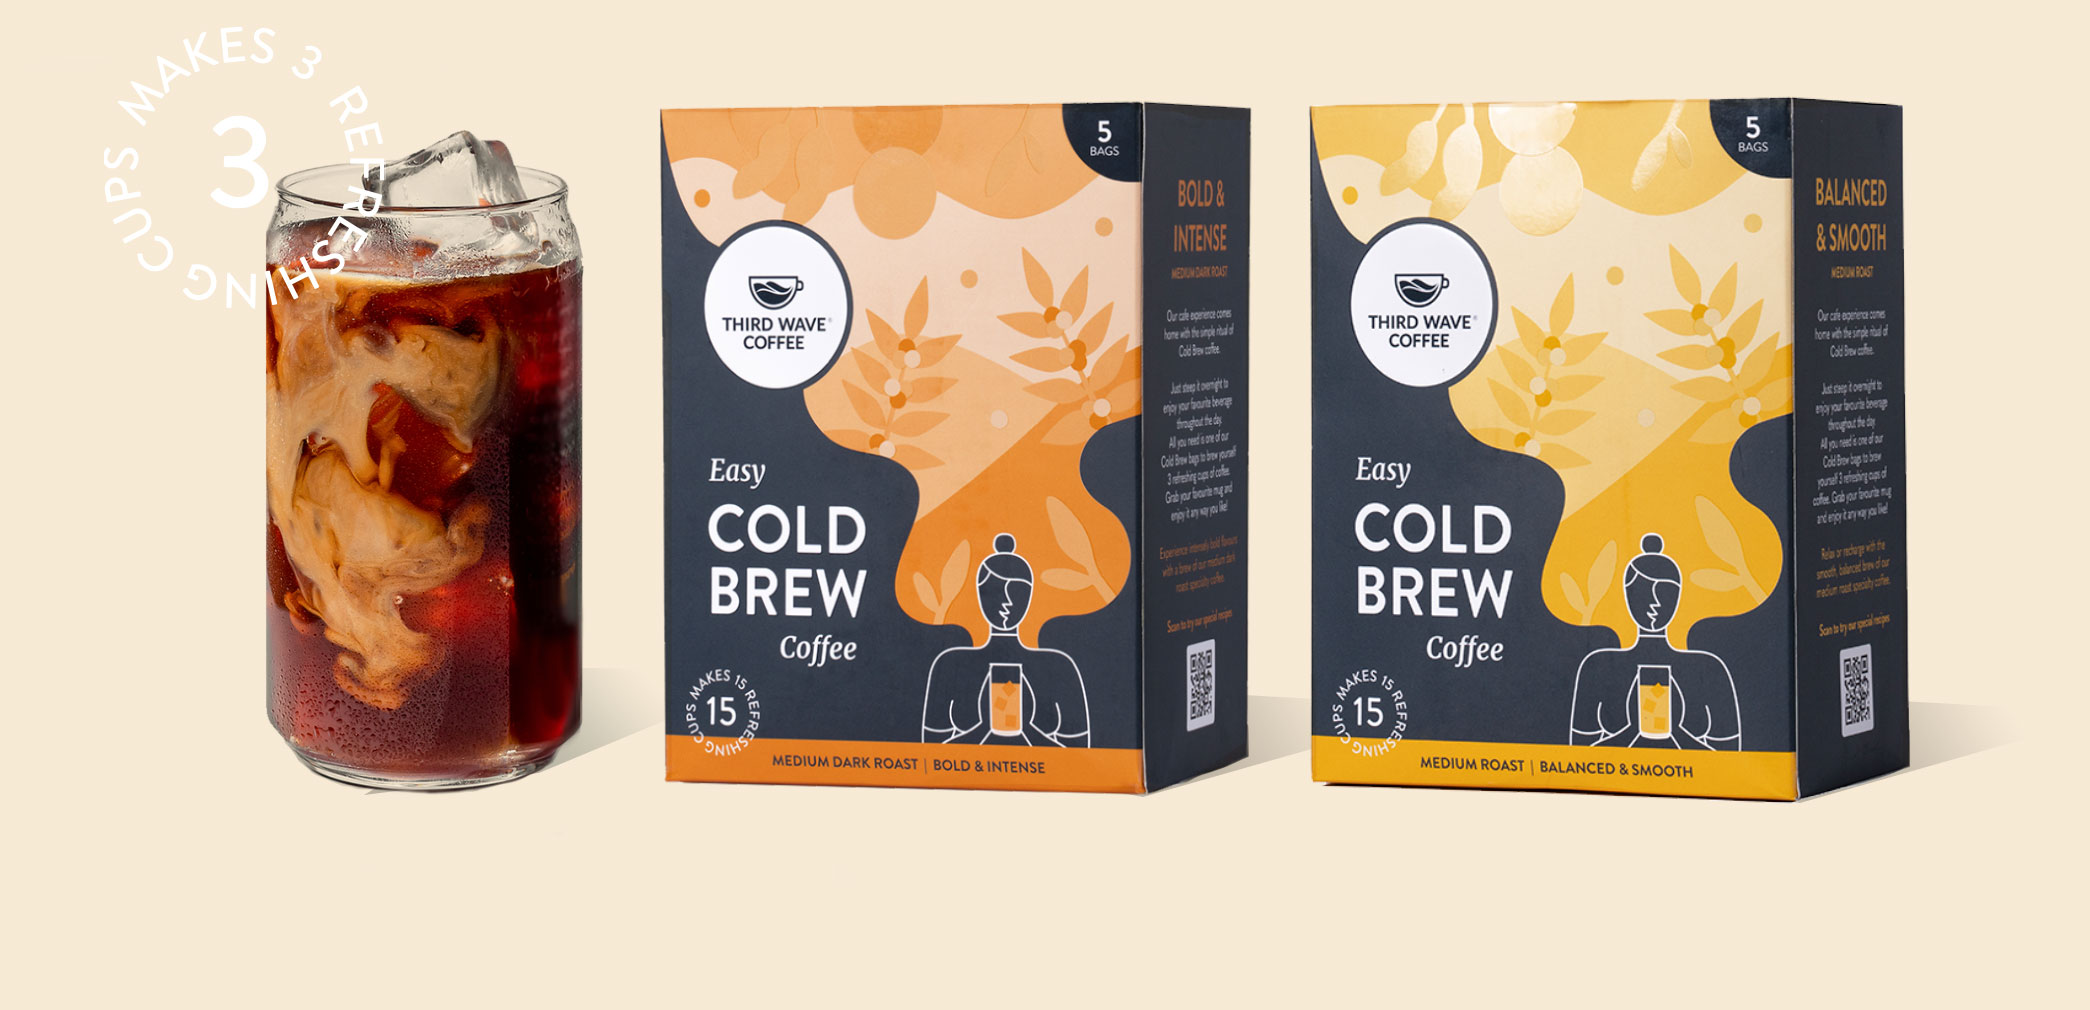 Packaging Design for Easy Cold Brew